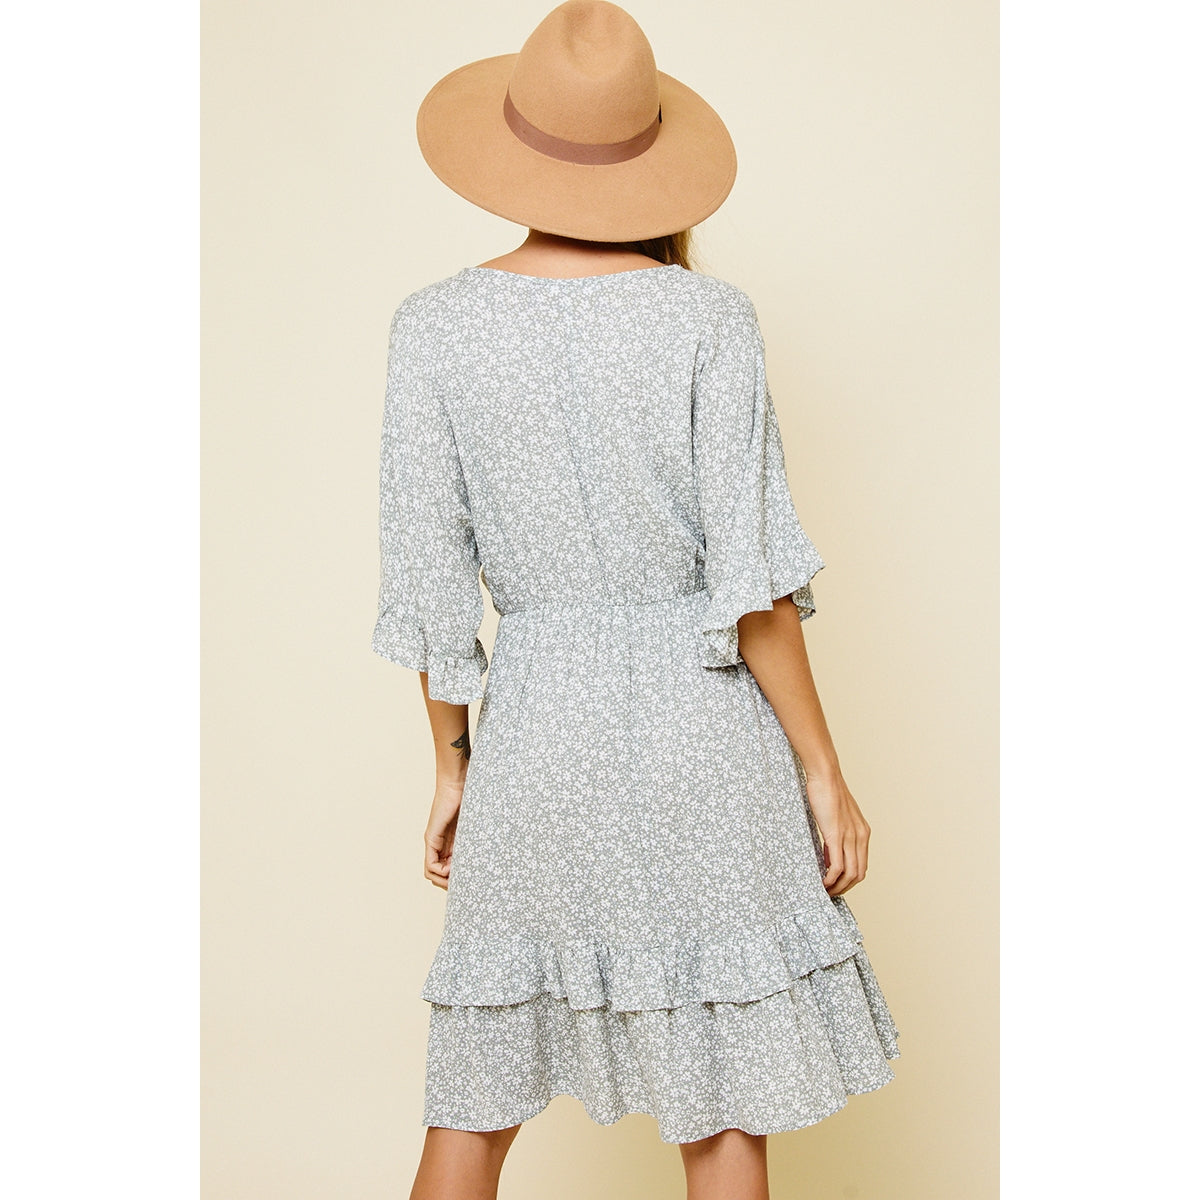 Back view of blonde model wearing a ruffle dress with a sage and white daisy floral print paired with a tan suede hat